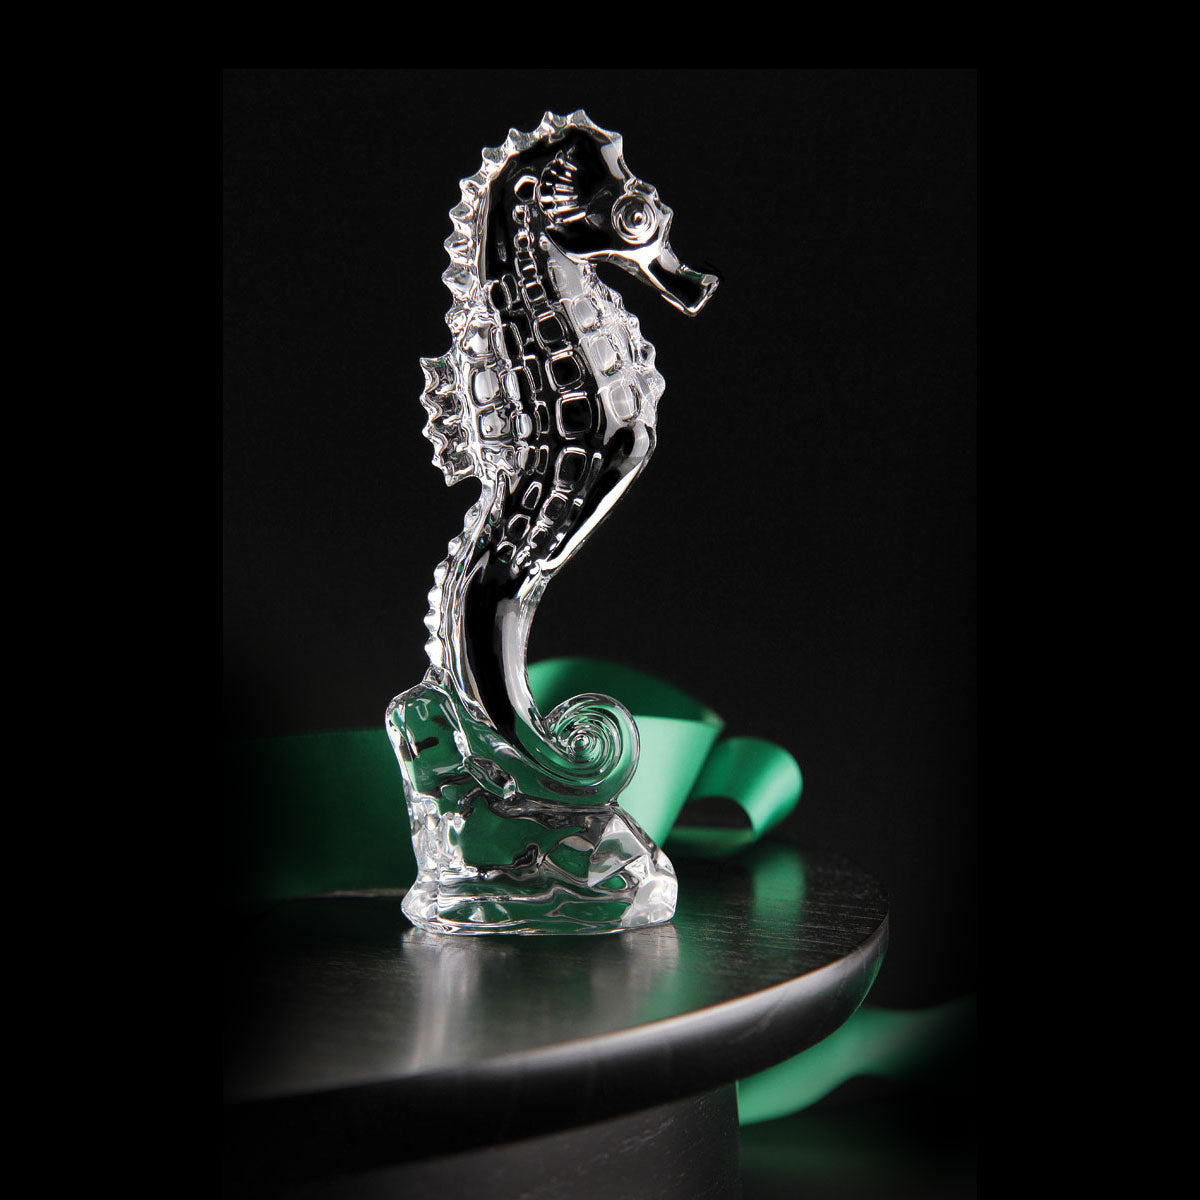 Giftology Seahorse Collectible by Waterford  The Giftology collection features Waterford's best crystal gifts in compelling gift boxes designed in 5 different eye-catching color schemes with opulent gold touches. 